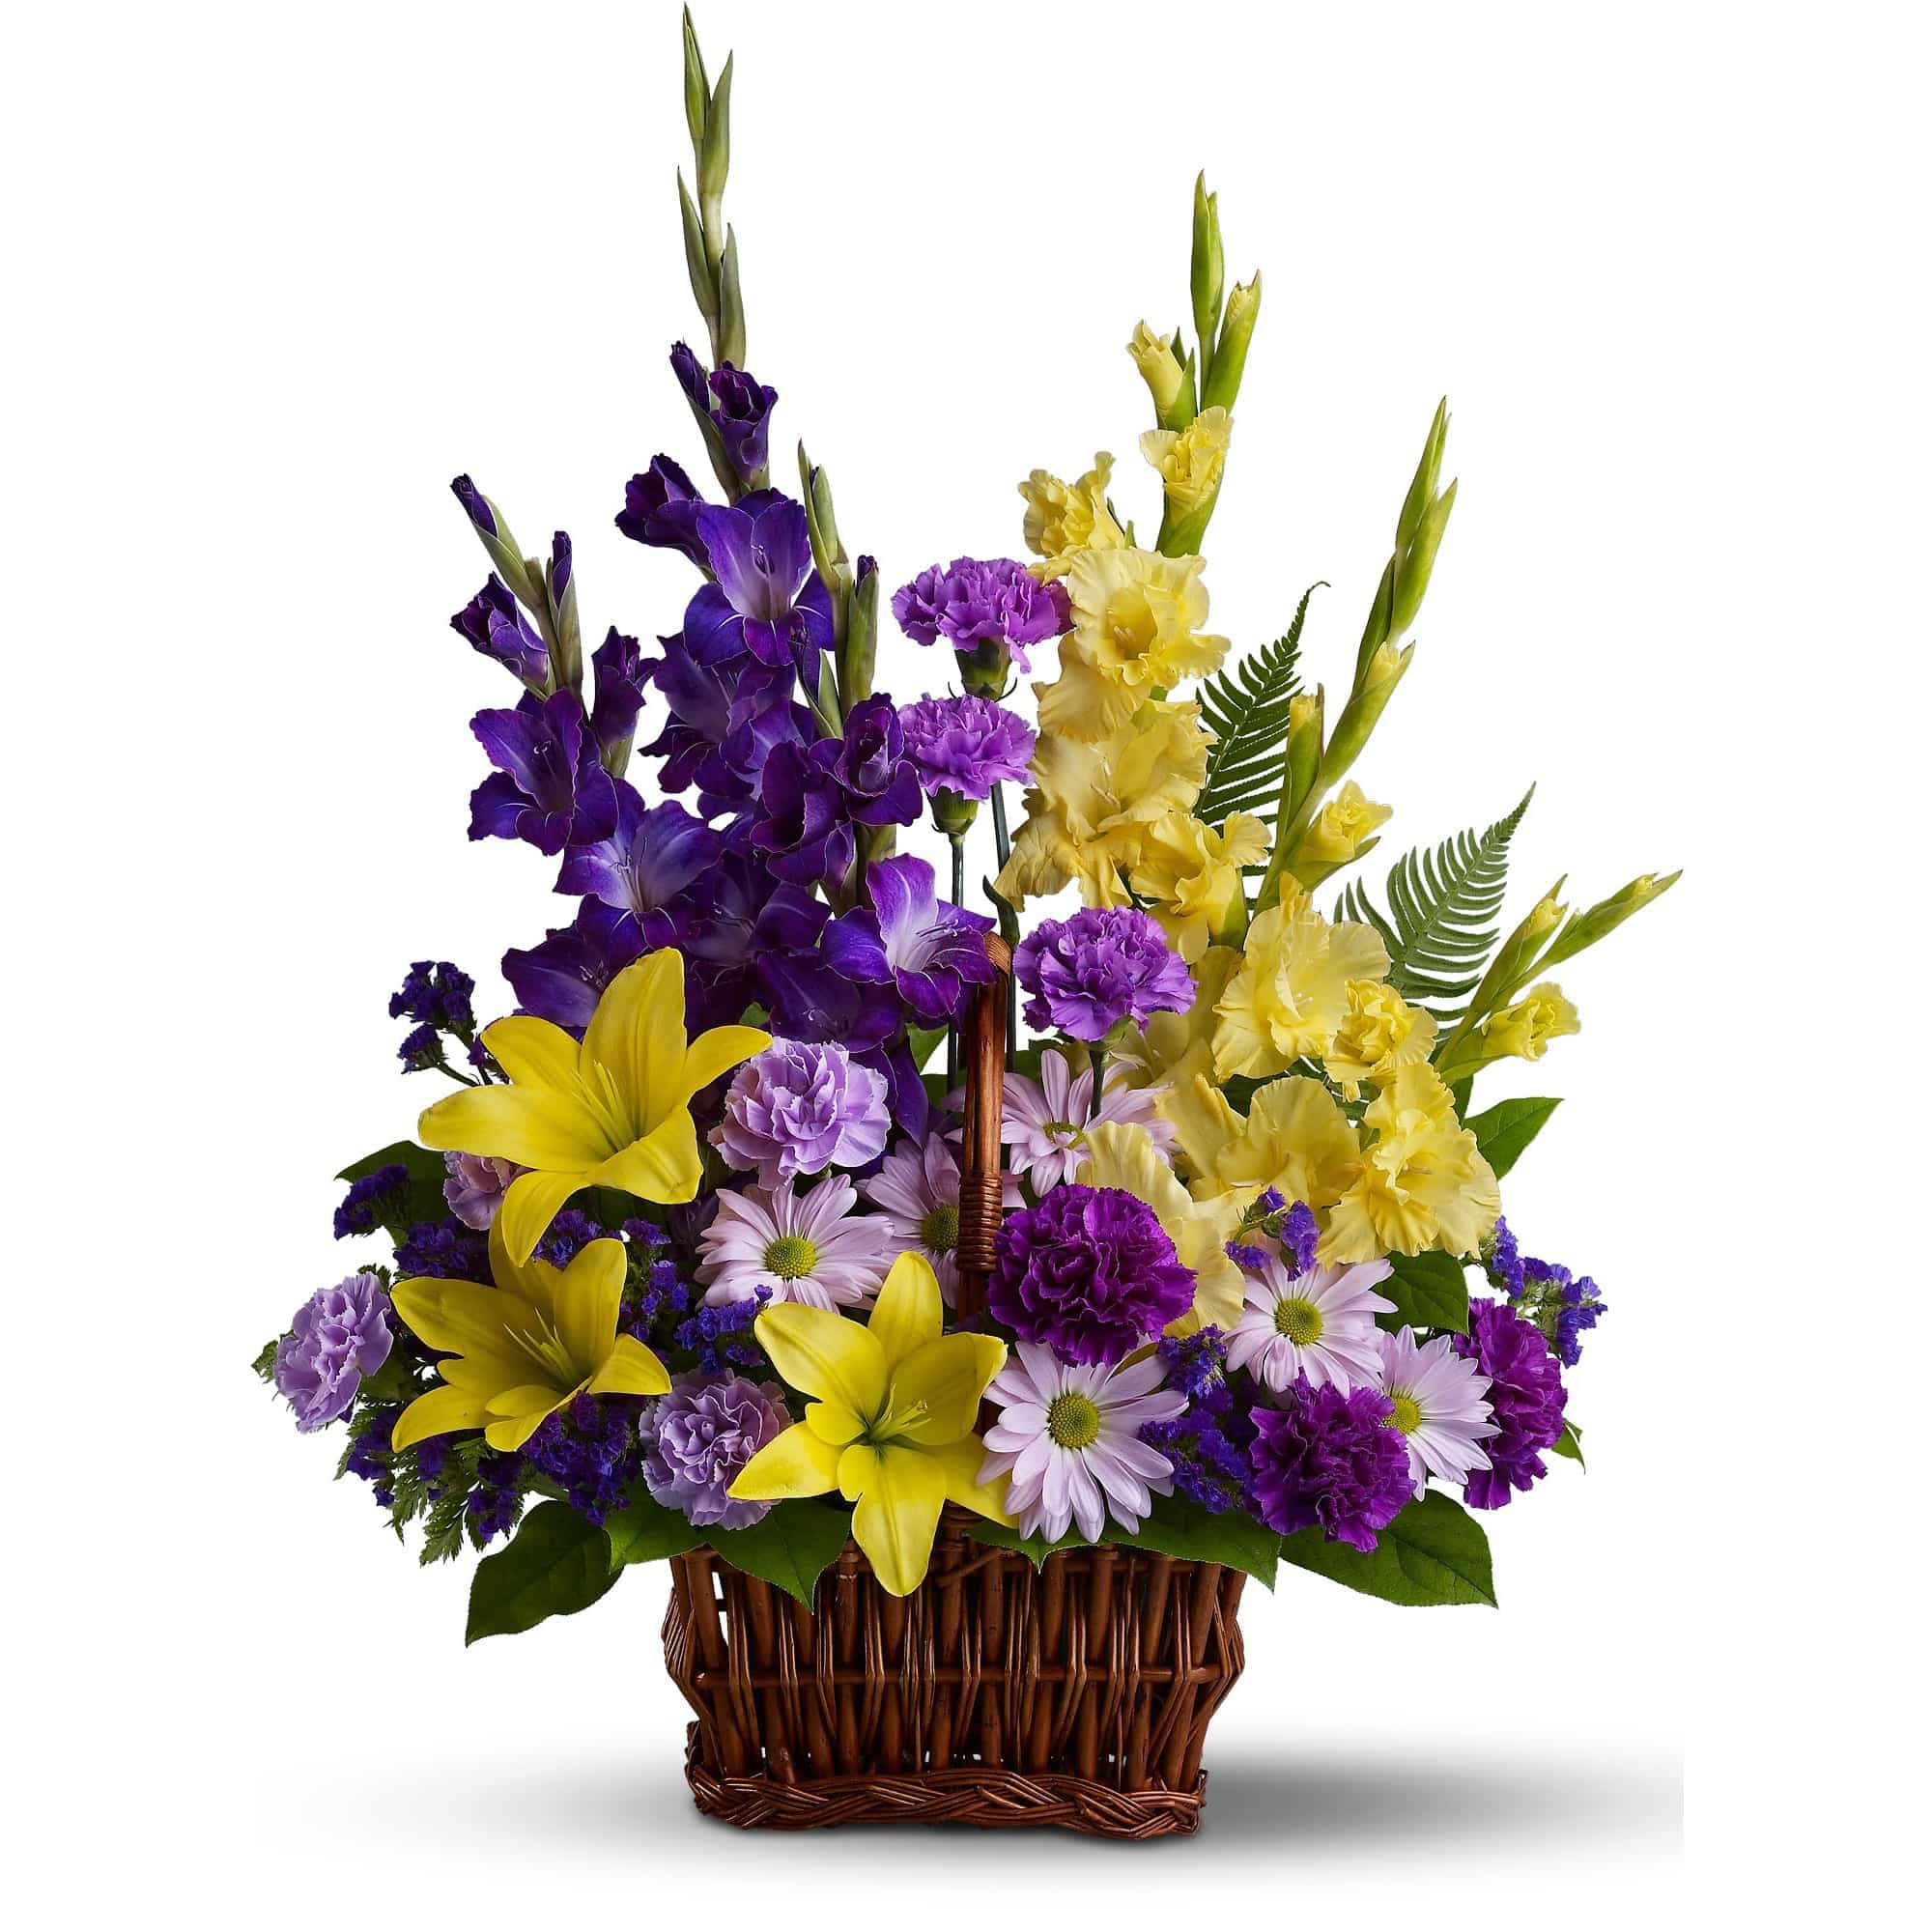 unique sympathy basket accents yellow lilies and purple gladioli with tropical greens and ferns